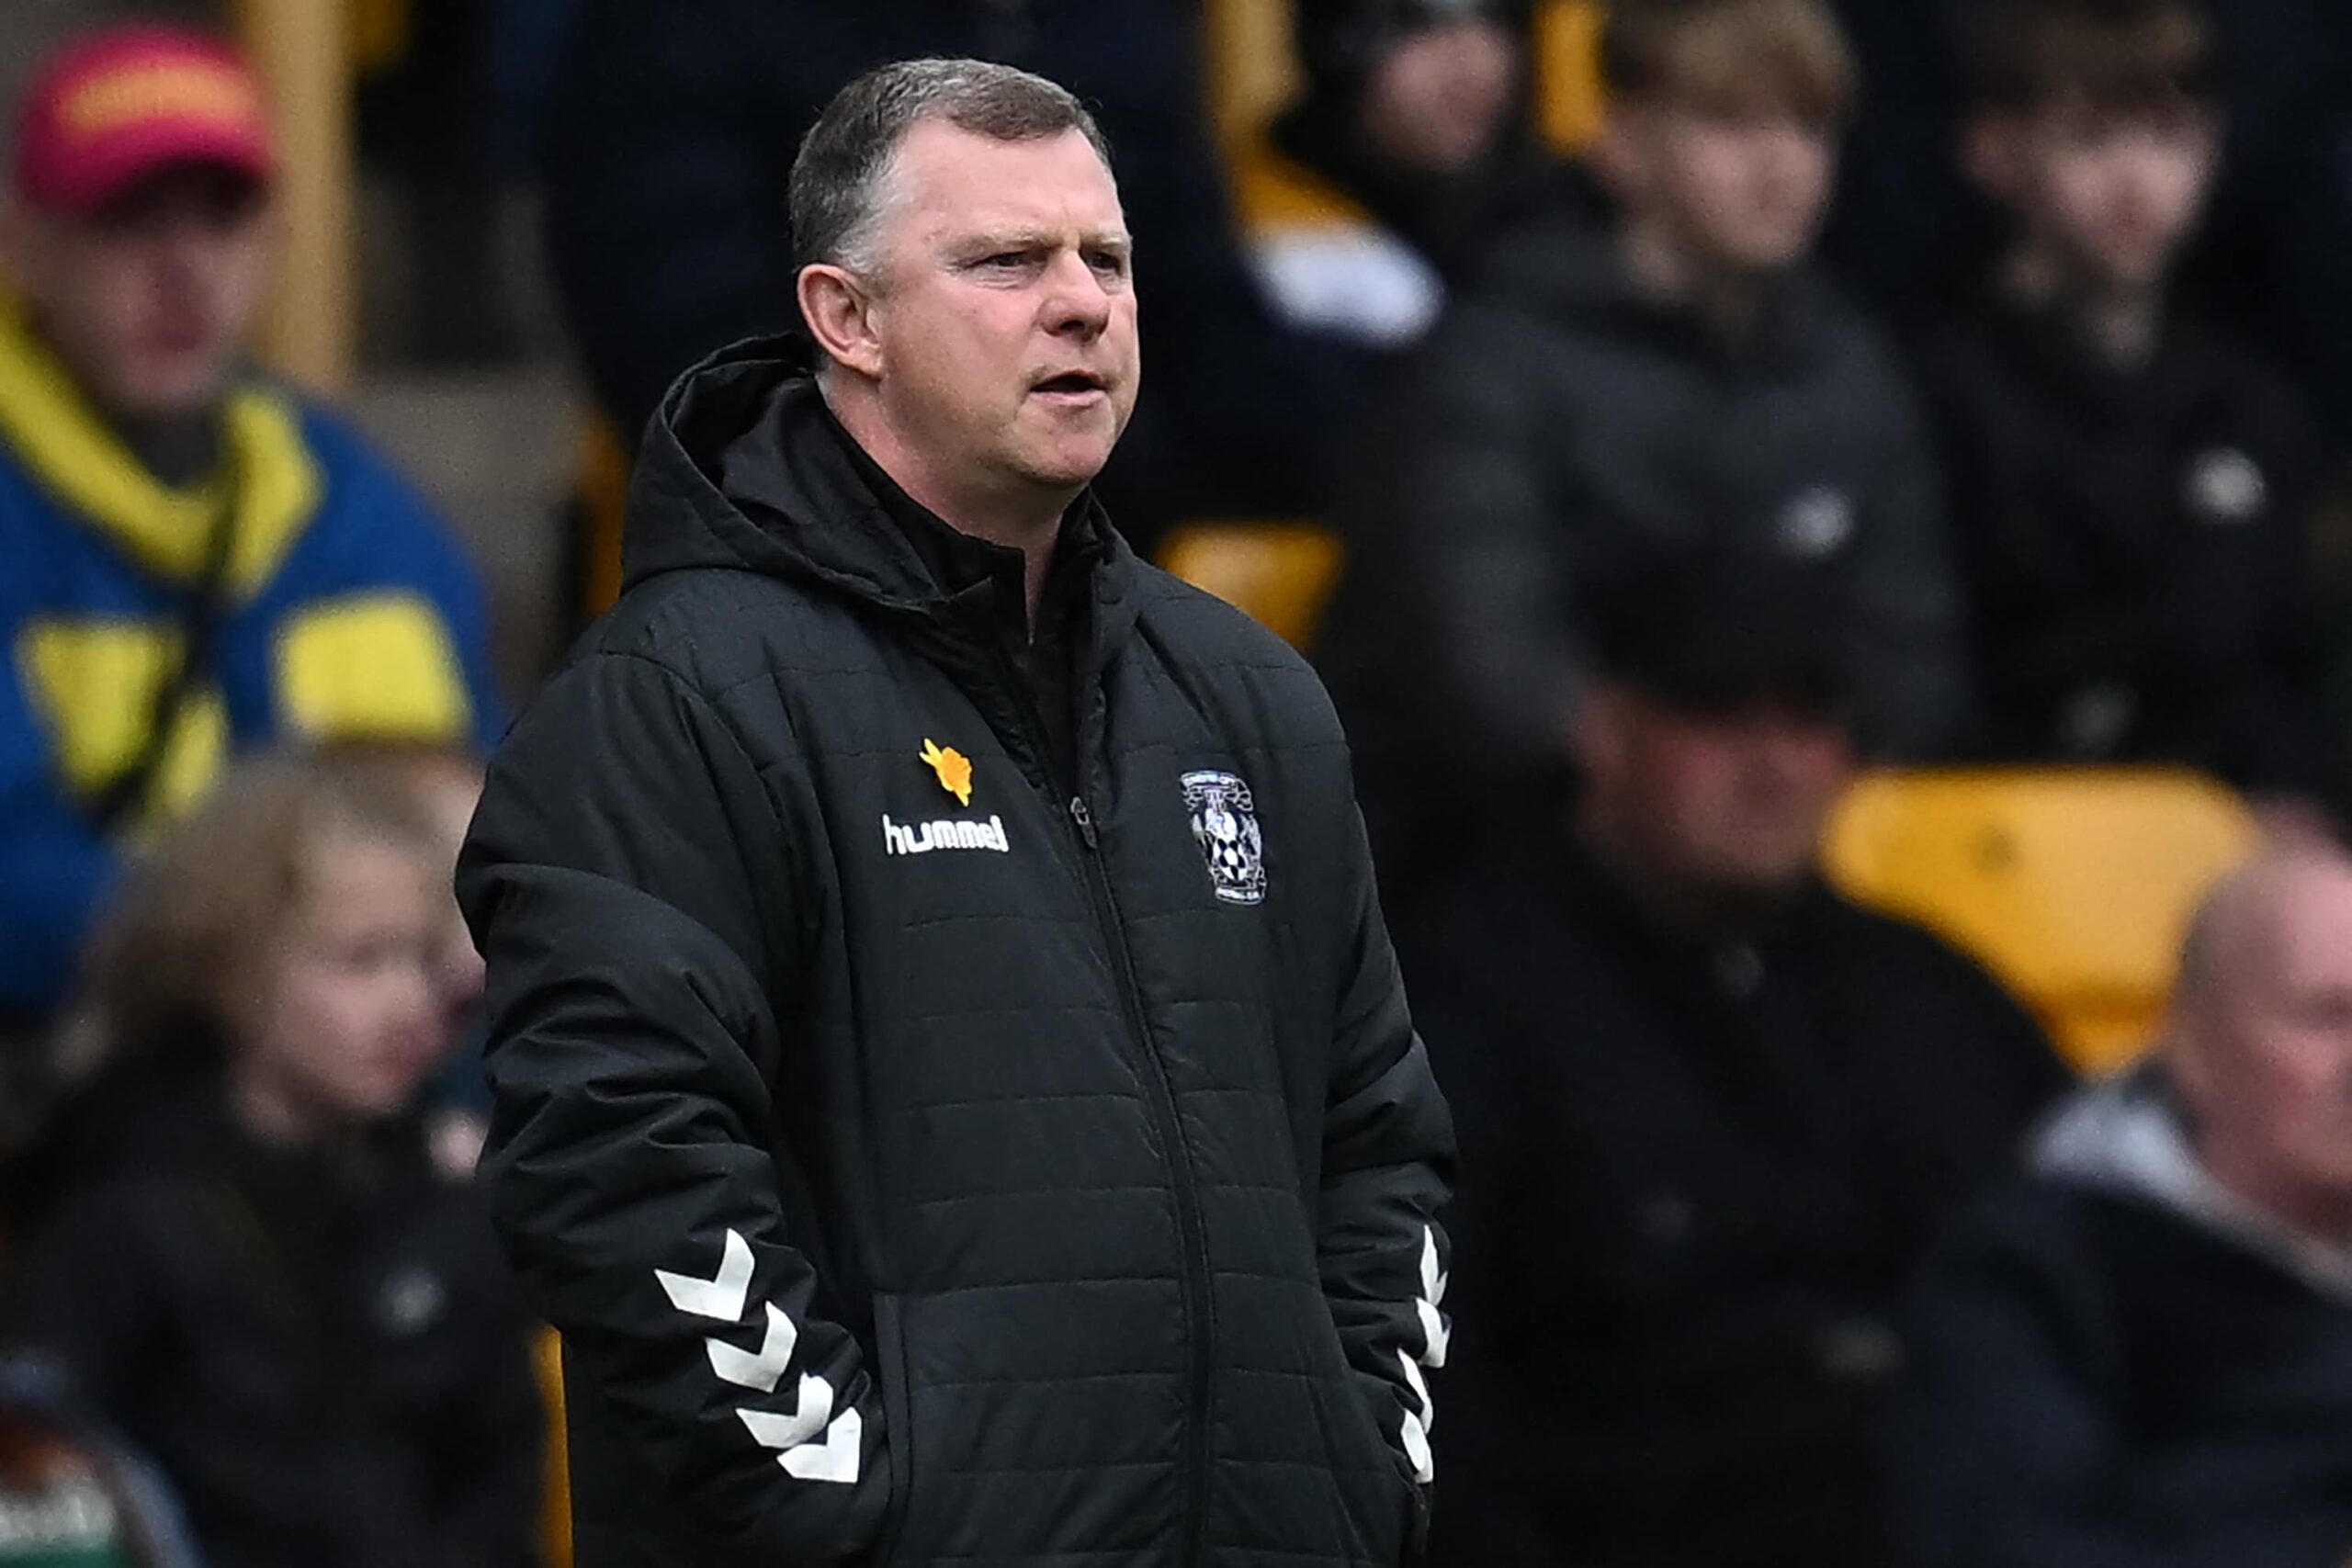 Coventry City’s Mark Robins Plots Mancheser United Downfall In FA Cup Semi-Final